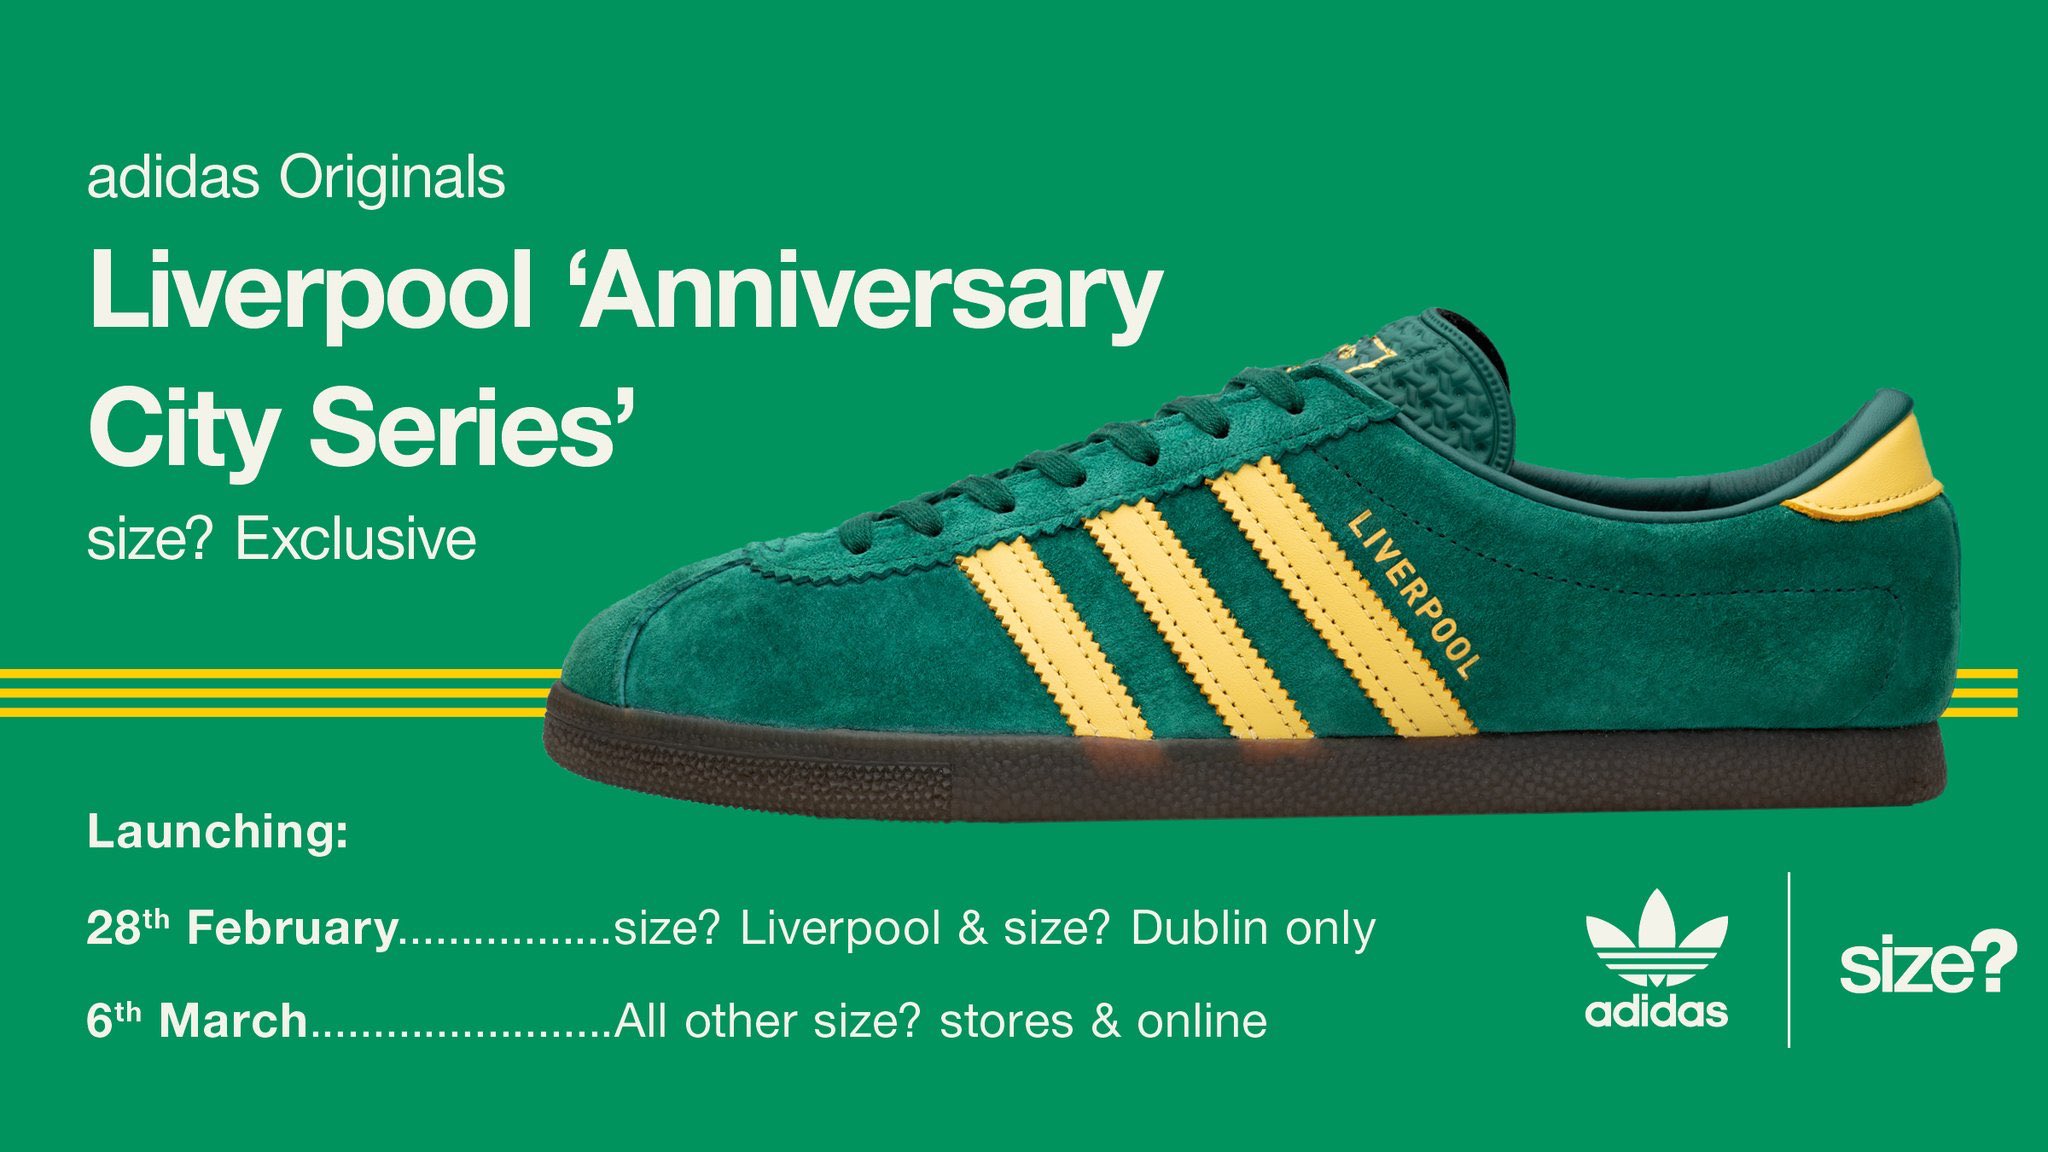 pronto hemisferio pálido Man Savings on Twitter: "📢Just Announced - Adidas Liverpool Release Info  28th Feb - Liverpool and Dublin stores. 6th March - All other Size stores  and online. #adidasliverpool https://t.co/uqK89e5Iqz" / Twitter